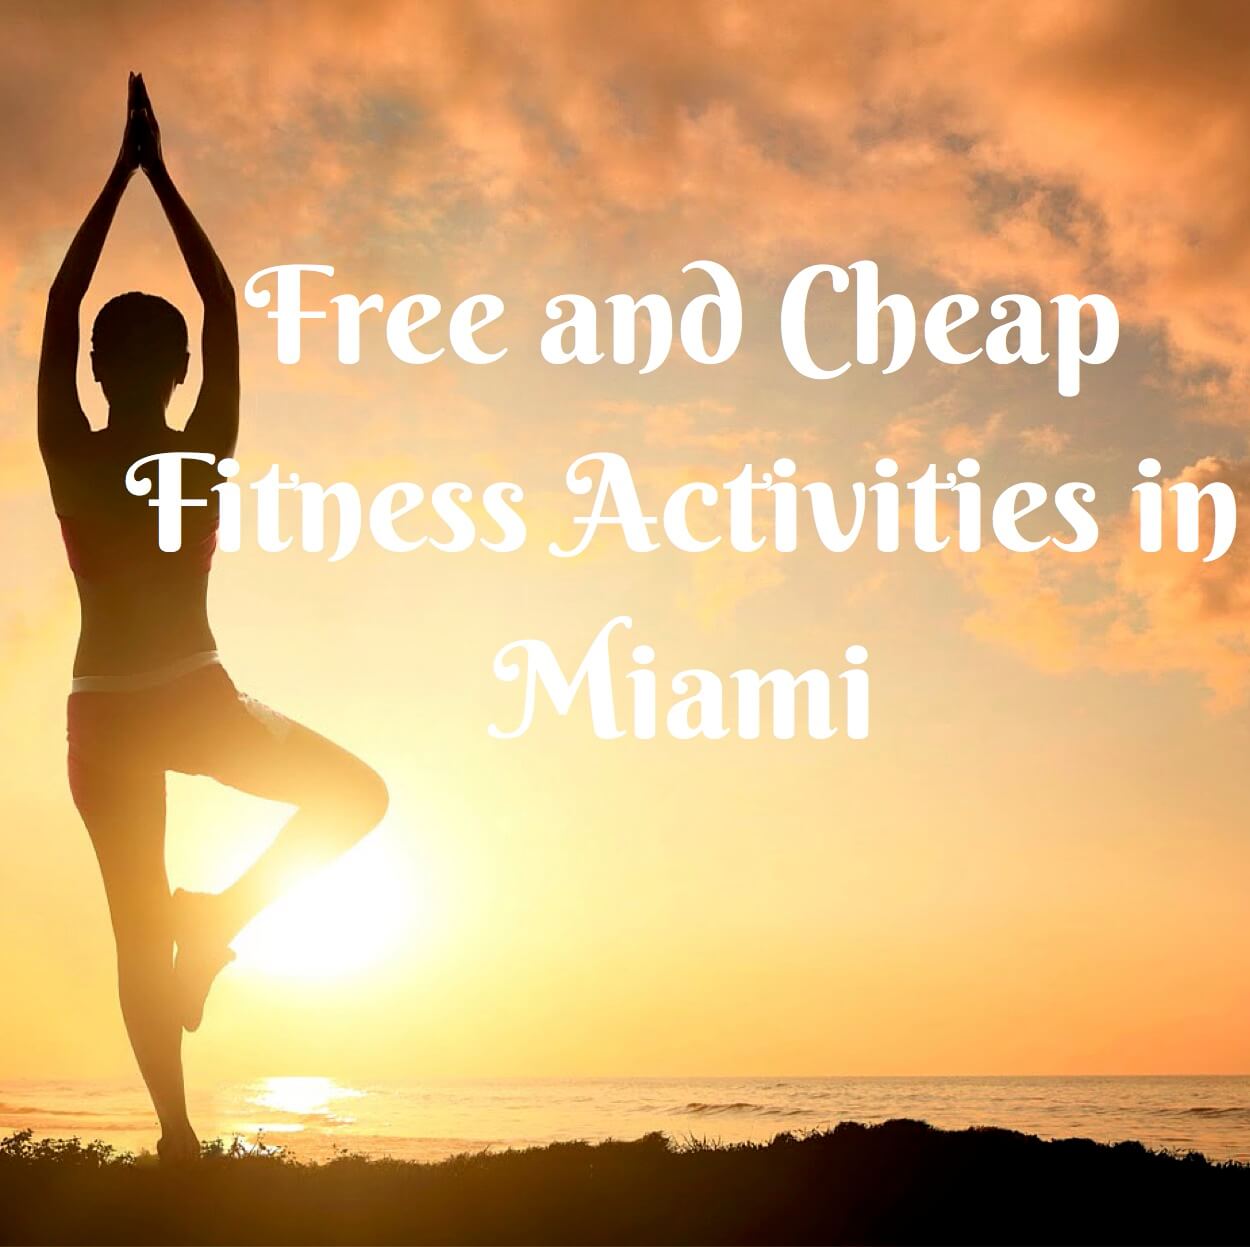 Free and Cheap Fitness Activities in Miami